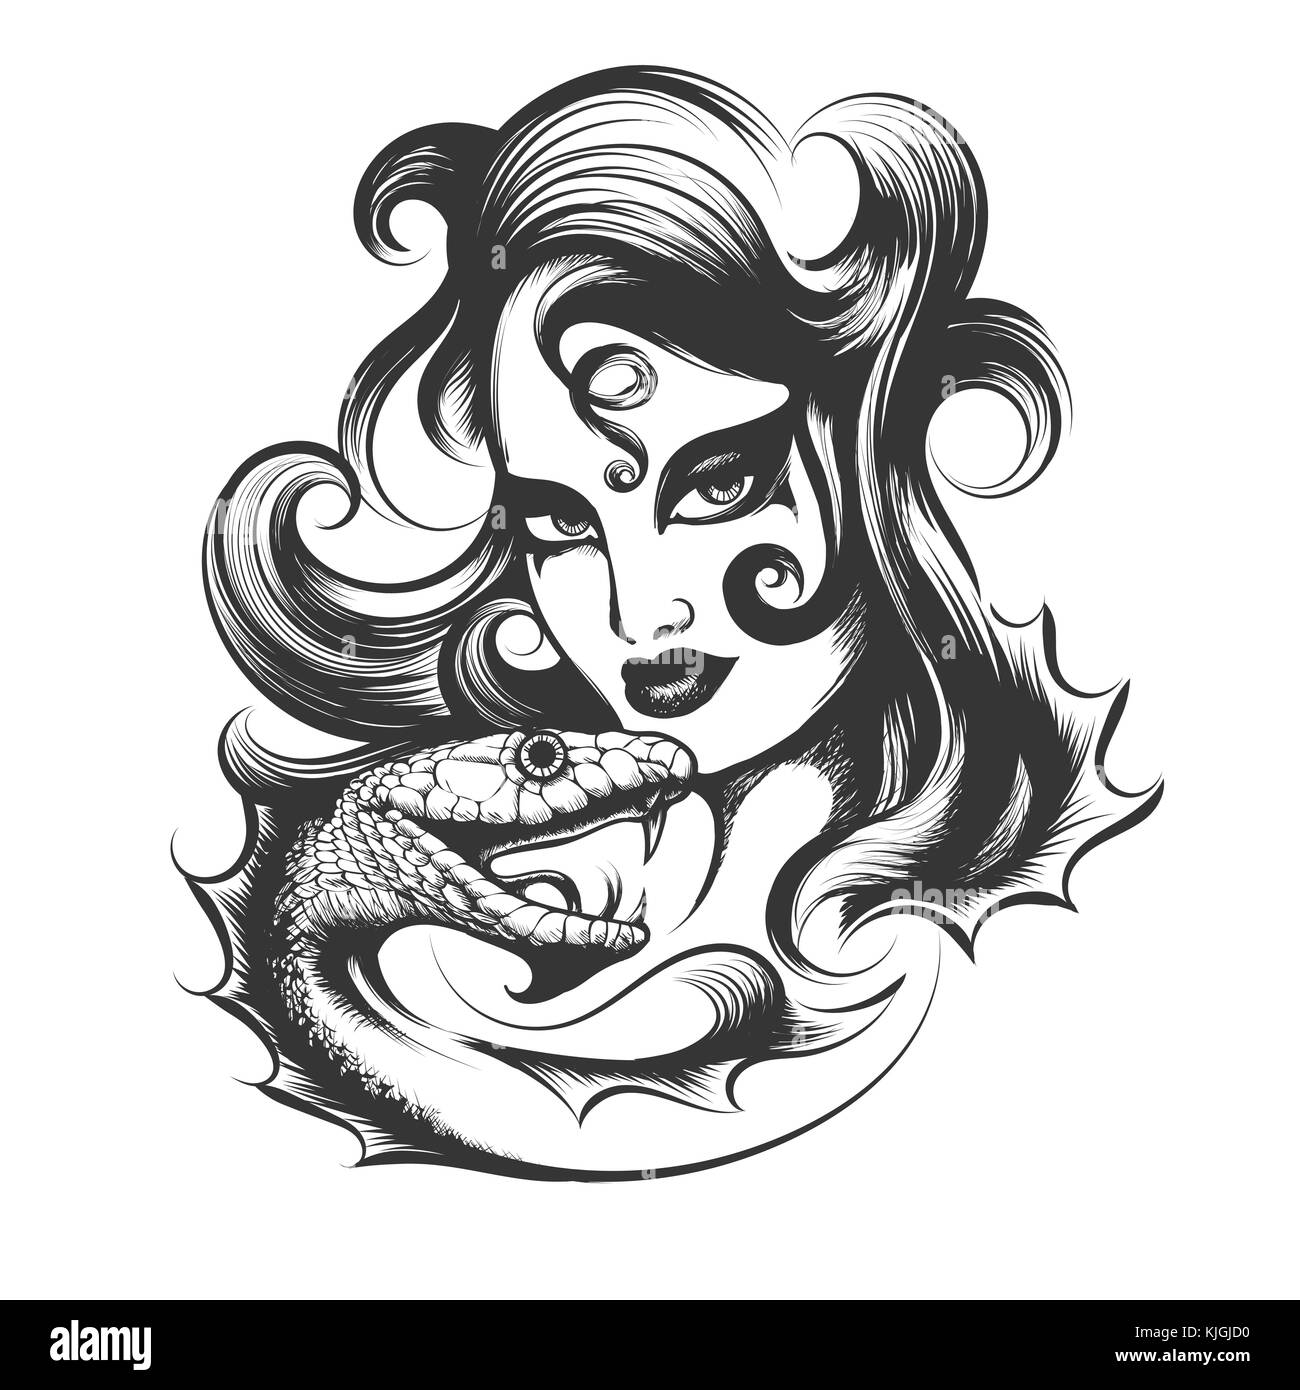 Snake Lady Tattoos: From Myth to Your Skin – All Things Tattoo